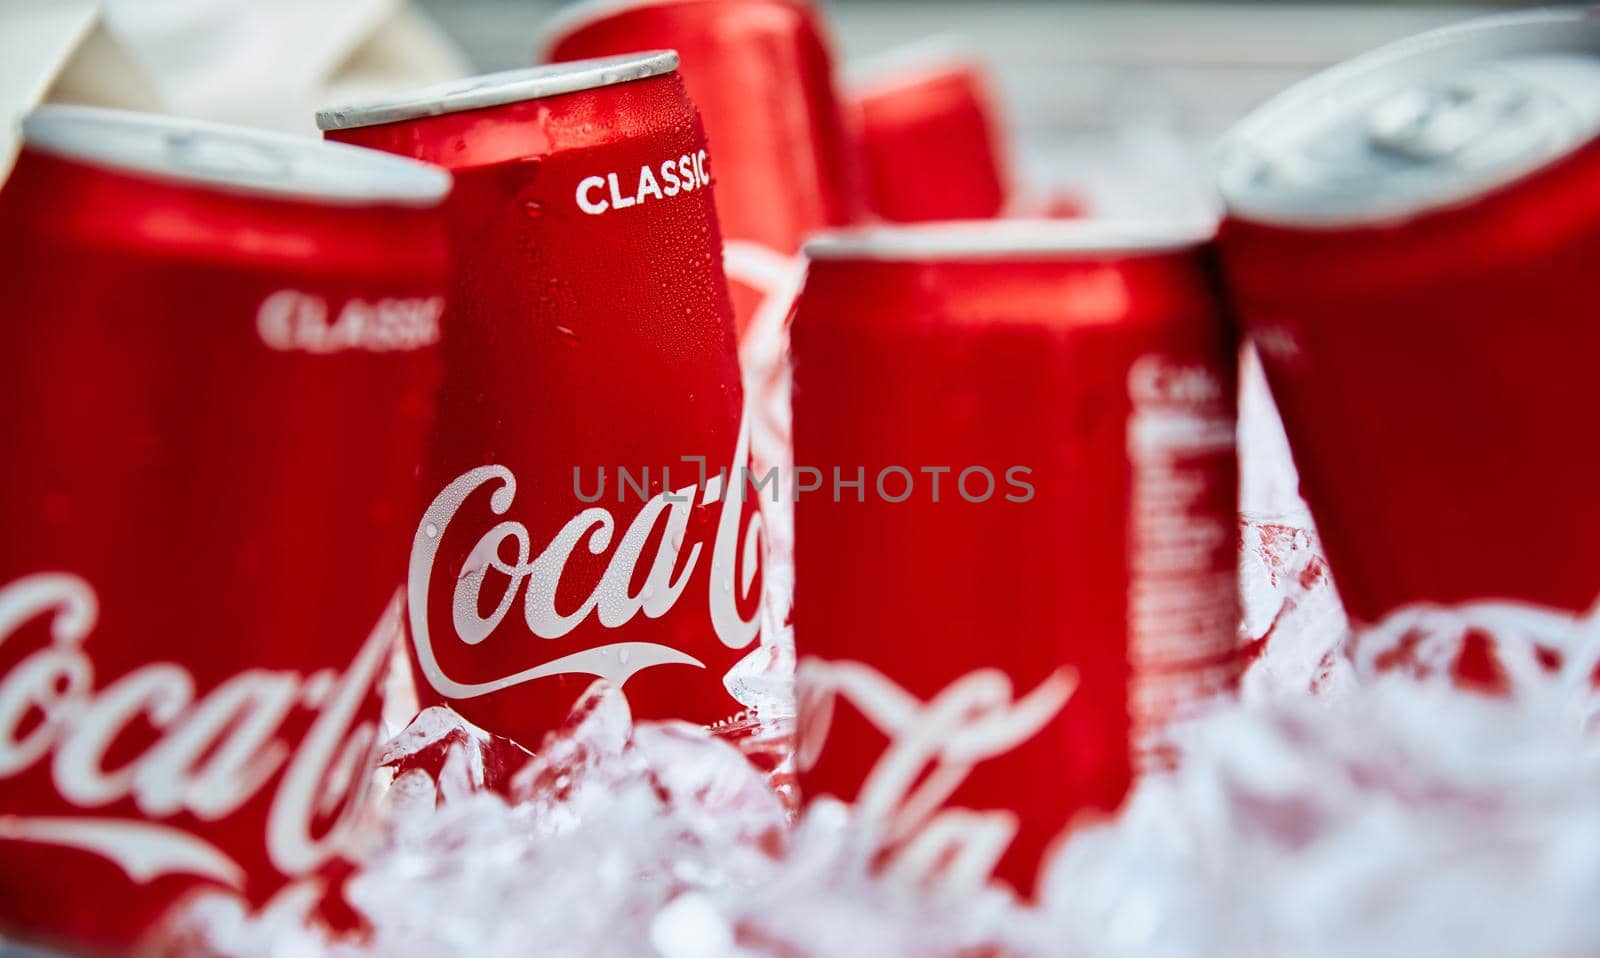 Coca-Cola cans in ice. Popular soft drink. 18.01.2019 Singapore